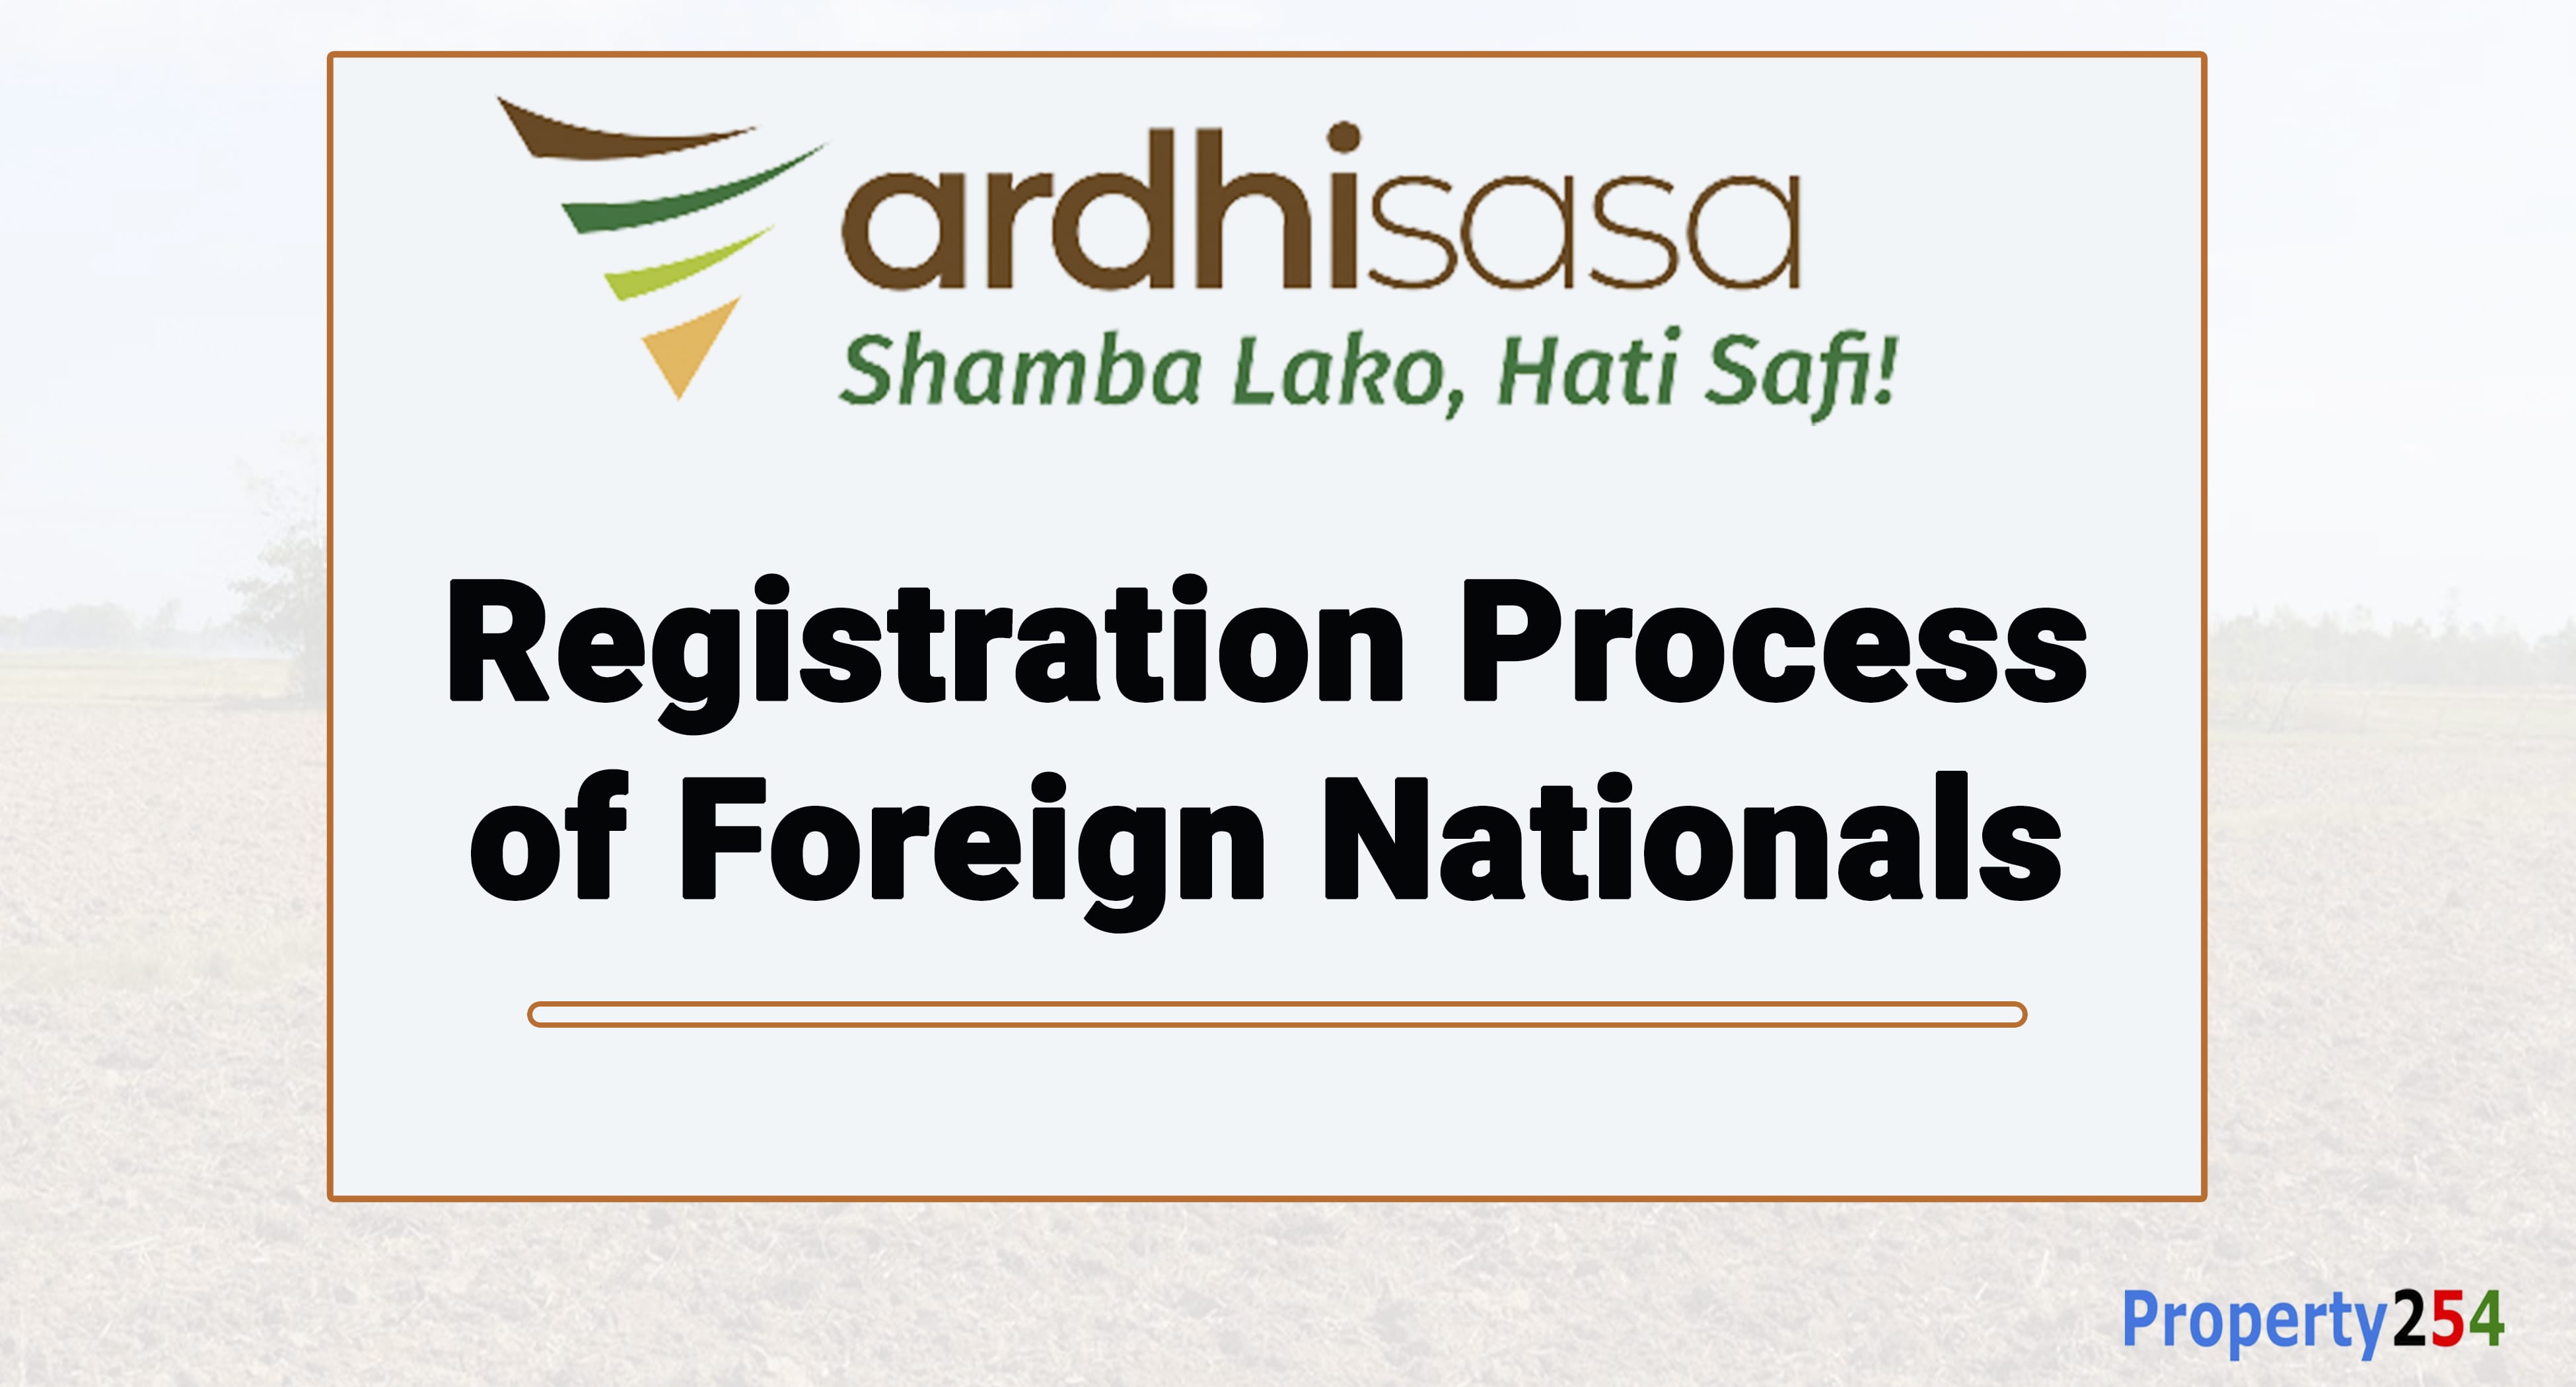 Registration Process of Foreign Nationals on Ardhisasa thumbnail